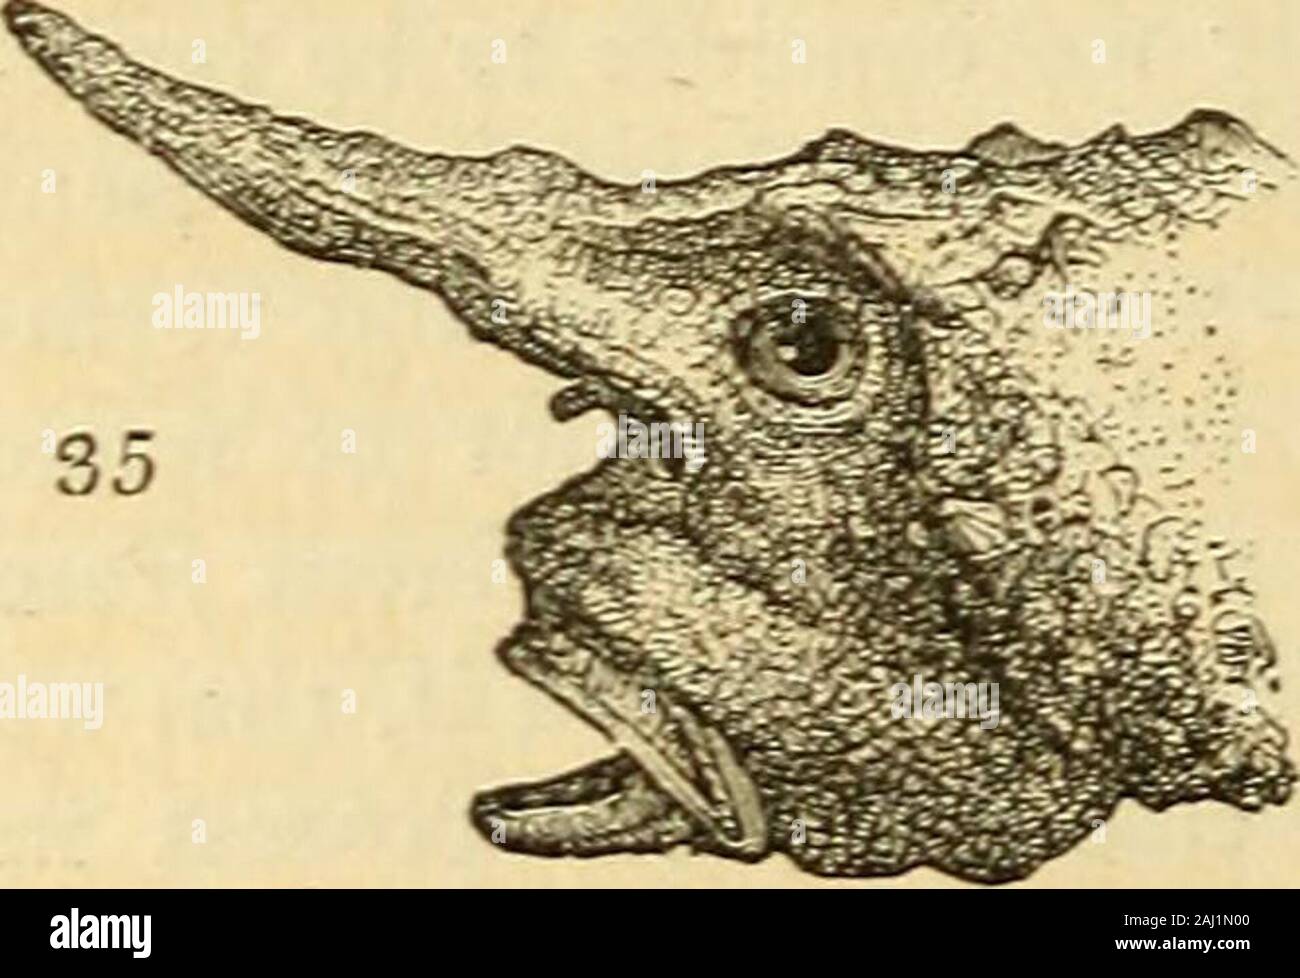 The natural history of fishes, amphibians, & reptiles, or monocardian animals . the most grotesque—we had almost said the most hide-ous—of all fishes, and, as their vernacular name of frog-fish implies, they have nearly as much the appearance offrogs or toads as of fish; this similarity may be perceivedin the headof Malthe nasuta(fig.S5.). The late Mr.Ben- net has very justly insisted onthe intimate affinity betweenthese strange-looking crea-tures and the file-fish, or Ba-listidce, — an affinity whichhas only been disturbed, aswe believe, in the RegneAnimal. The imaginationcan scarcely conceiv Stock Photo